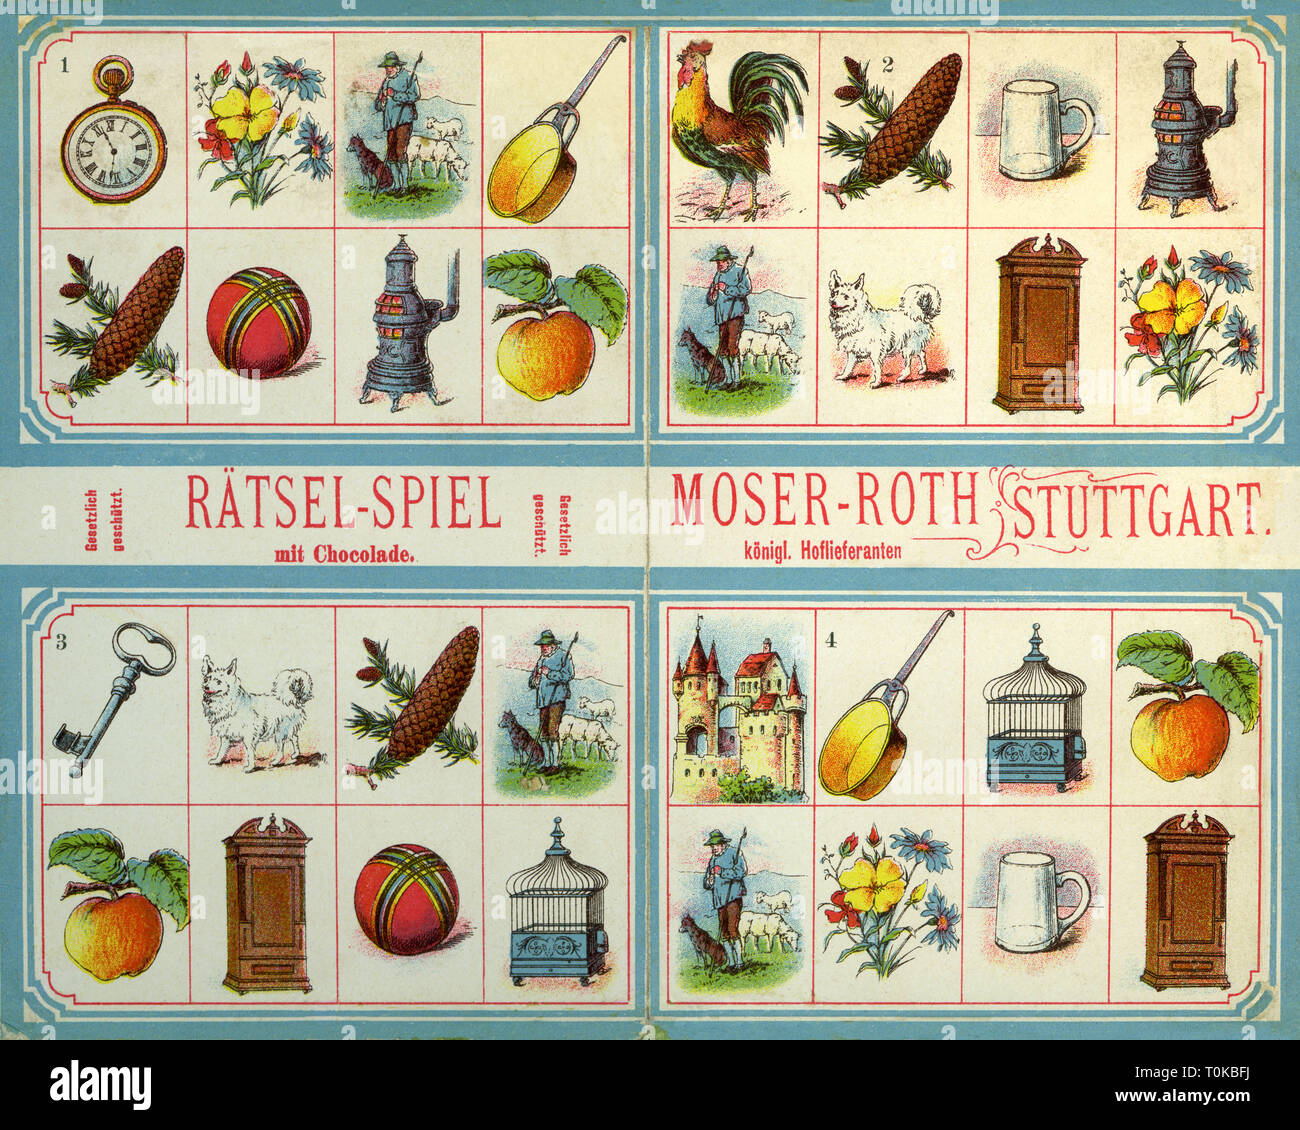 game, puzzle game with Chocolade, free advertising supplement with chocolate, chocolate manufacturer Moser-Roth, Stuttgart, the Stuttgart companies Moser (founded 1846) and Roth (founded 1841) joined together in 1896, a kind of memory game with cards, Stuttgart, Germany, 1898, Additional-Rights-Clearance-Info-Not-Available Stock Photo